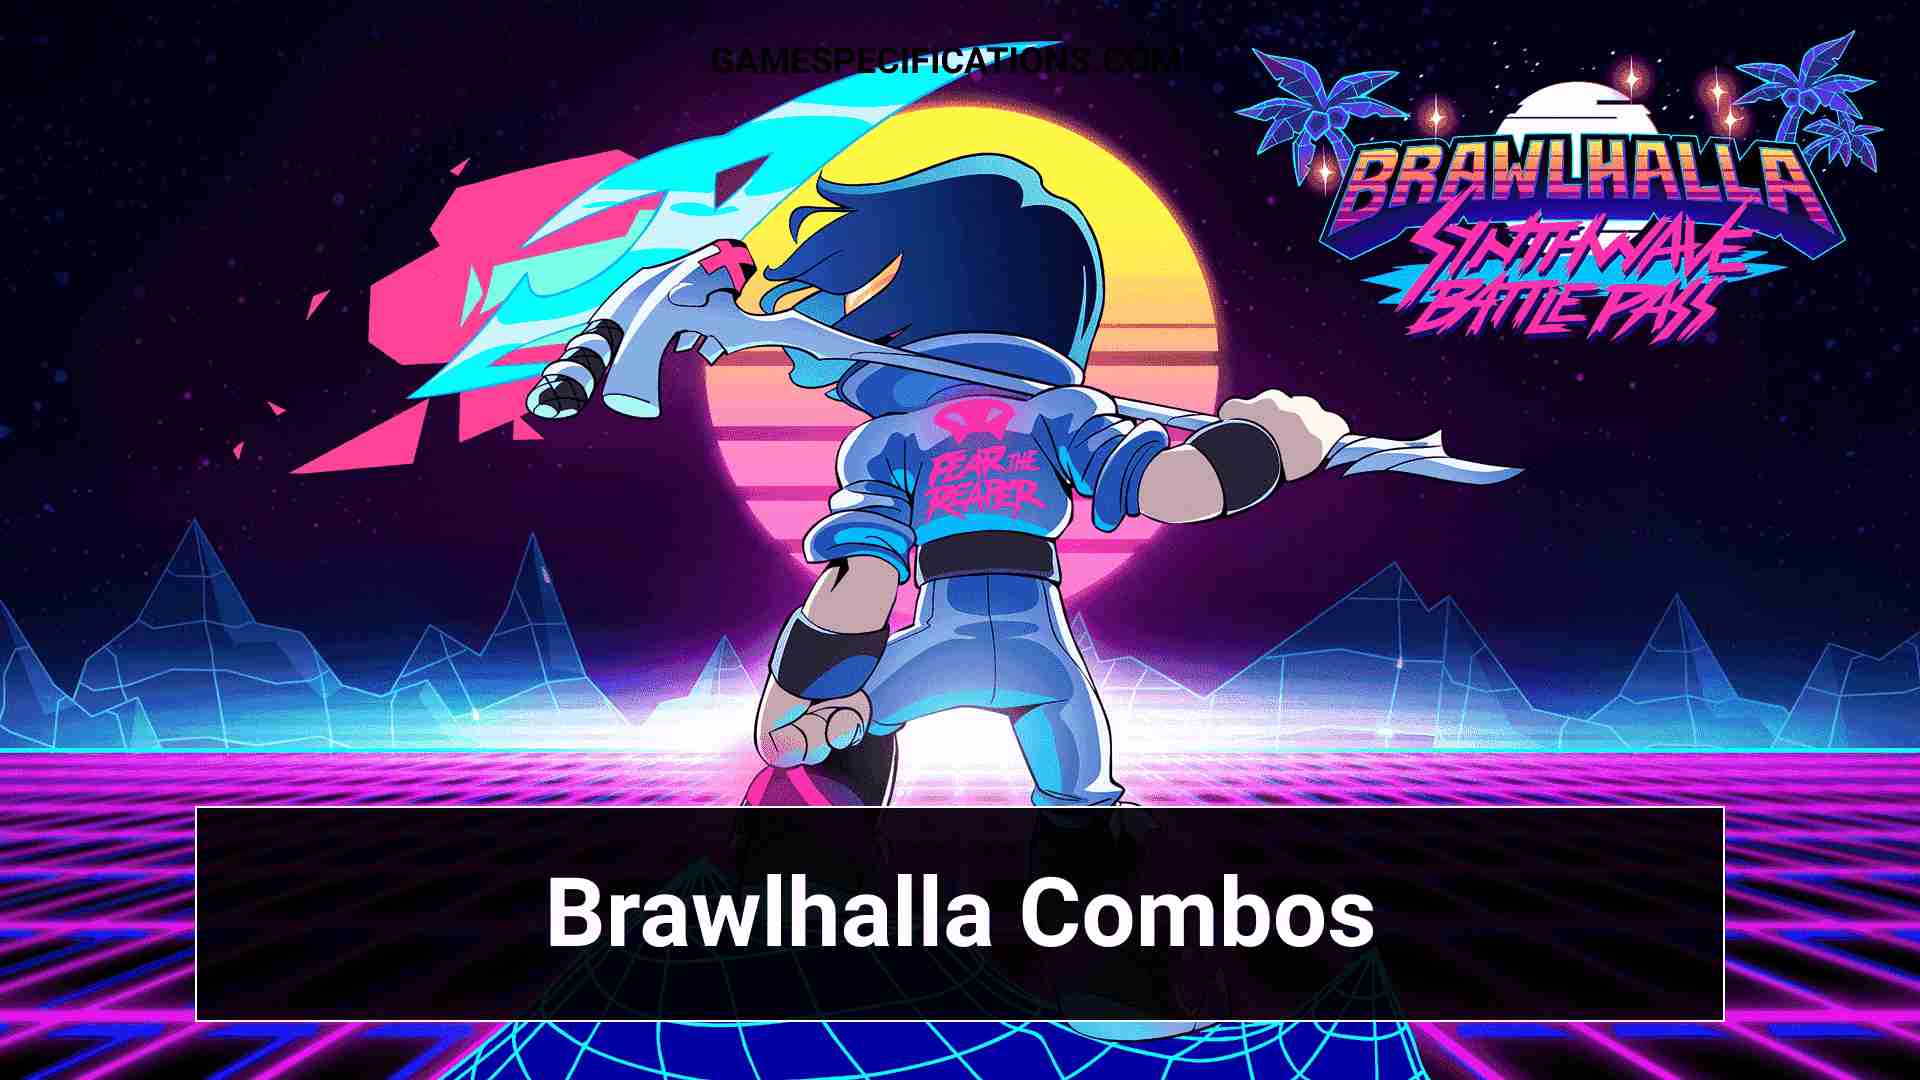 187 Brawlhalla Combos For Unarmed, Sword, Spear, Hammer, Guns & More